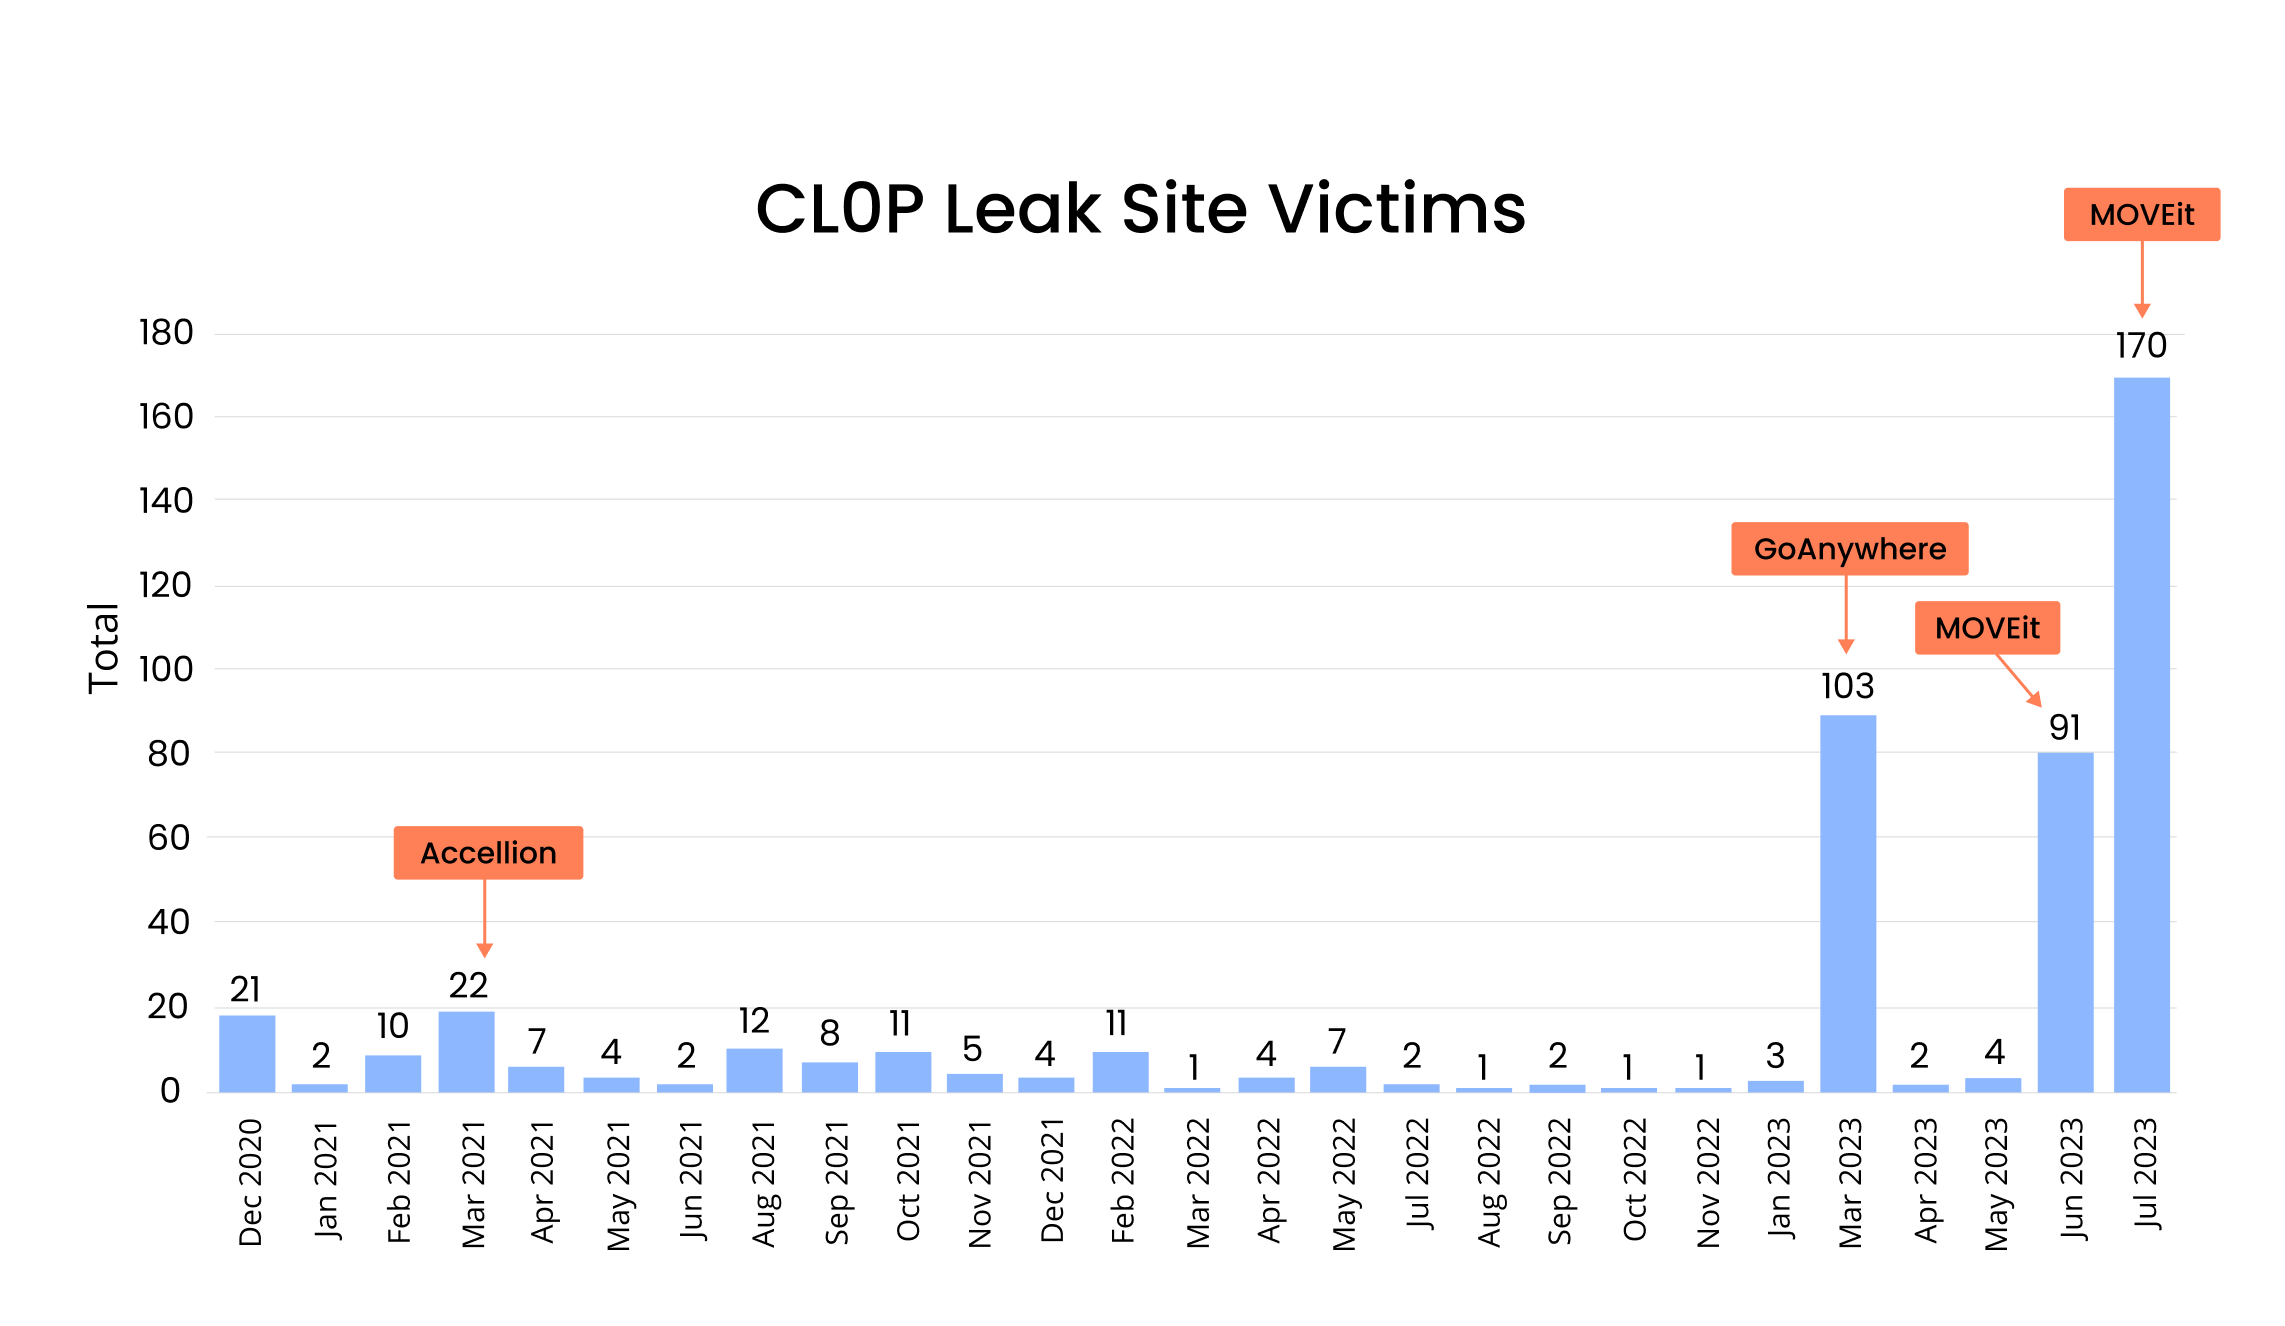 [BAR GRAPH] CL0P Leak Site Victims by Month from Dec. 2020 - July 2023